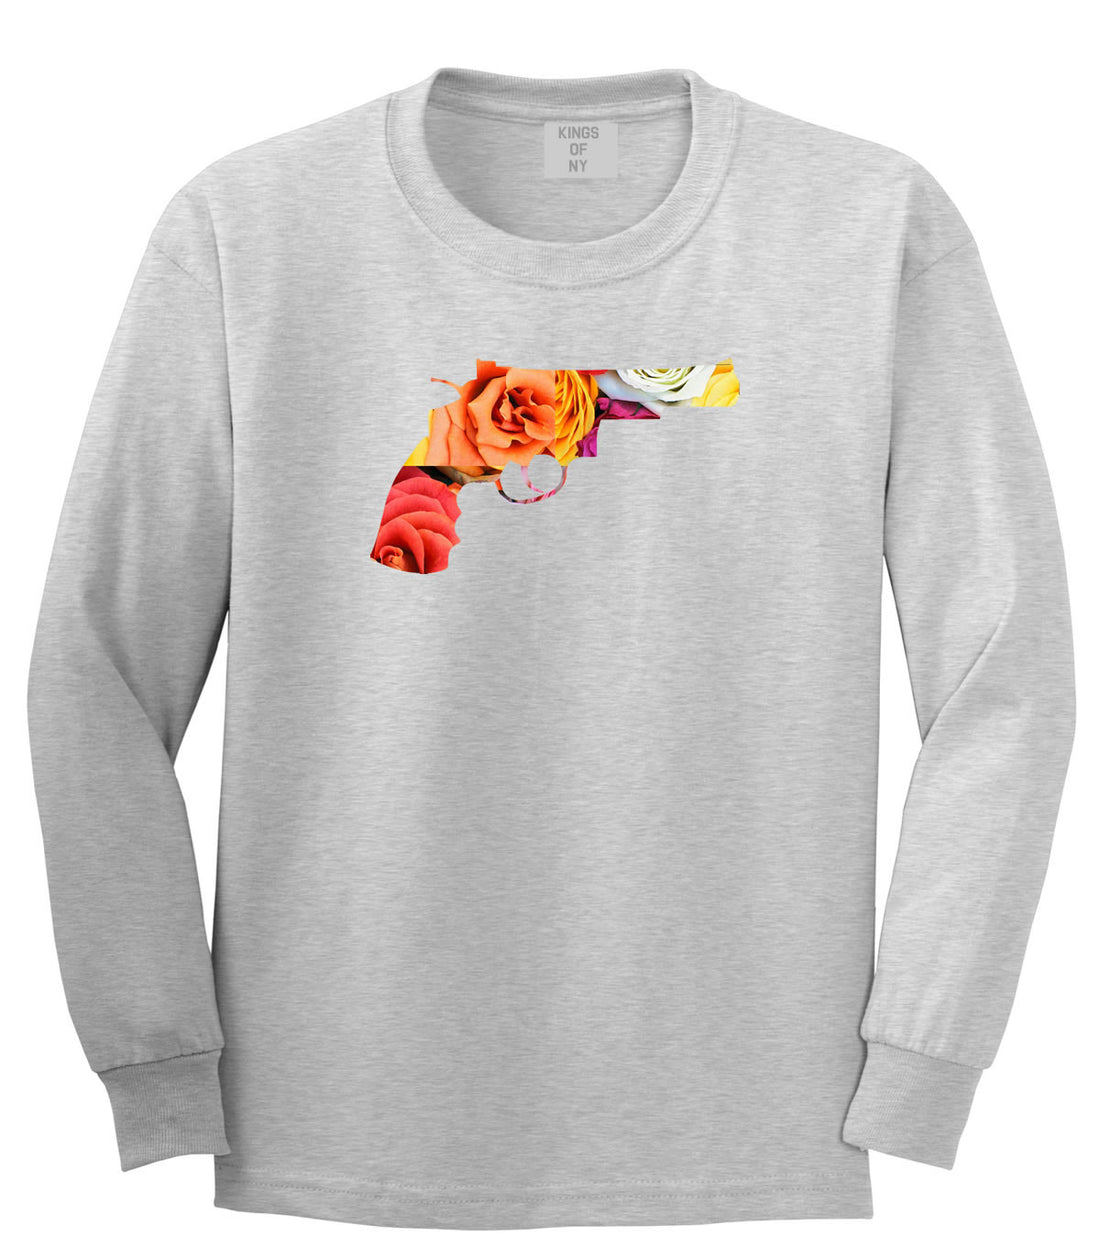 Floral Gun Flower Print Colt 45 Revolver Long Sleeve Boys Kids T-Shirt In Grey by Kings Of NY